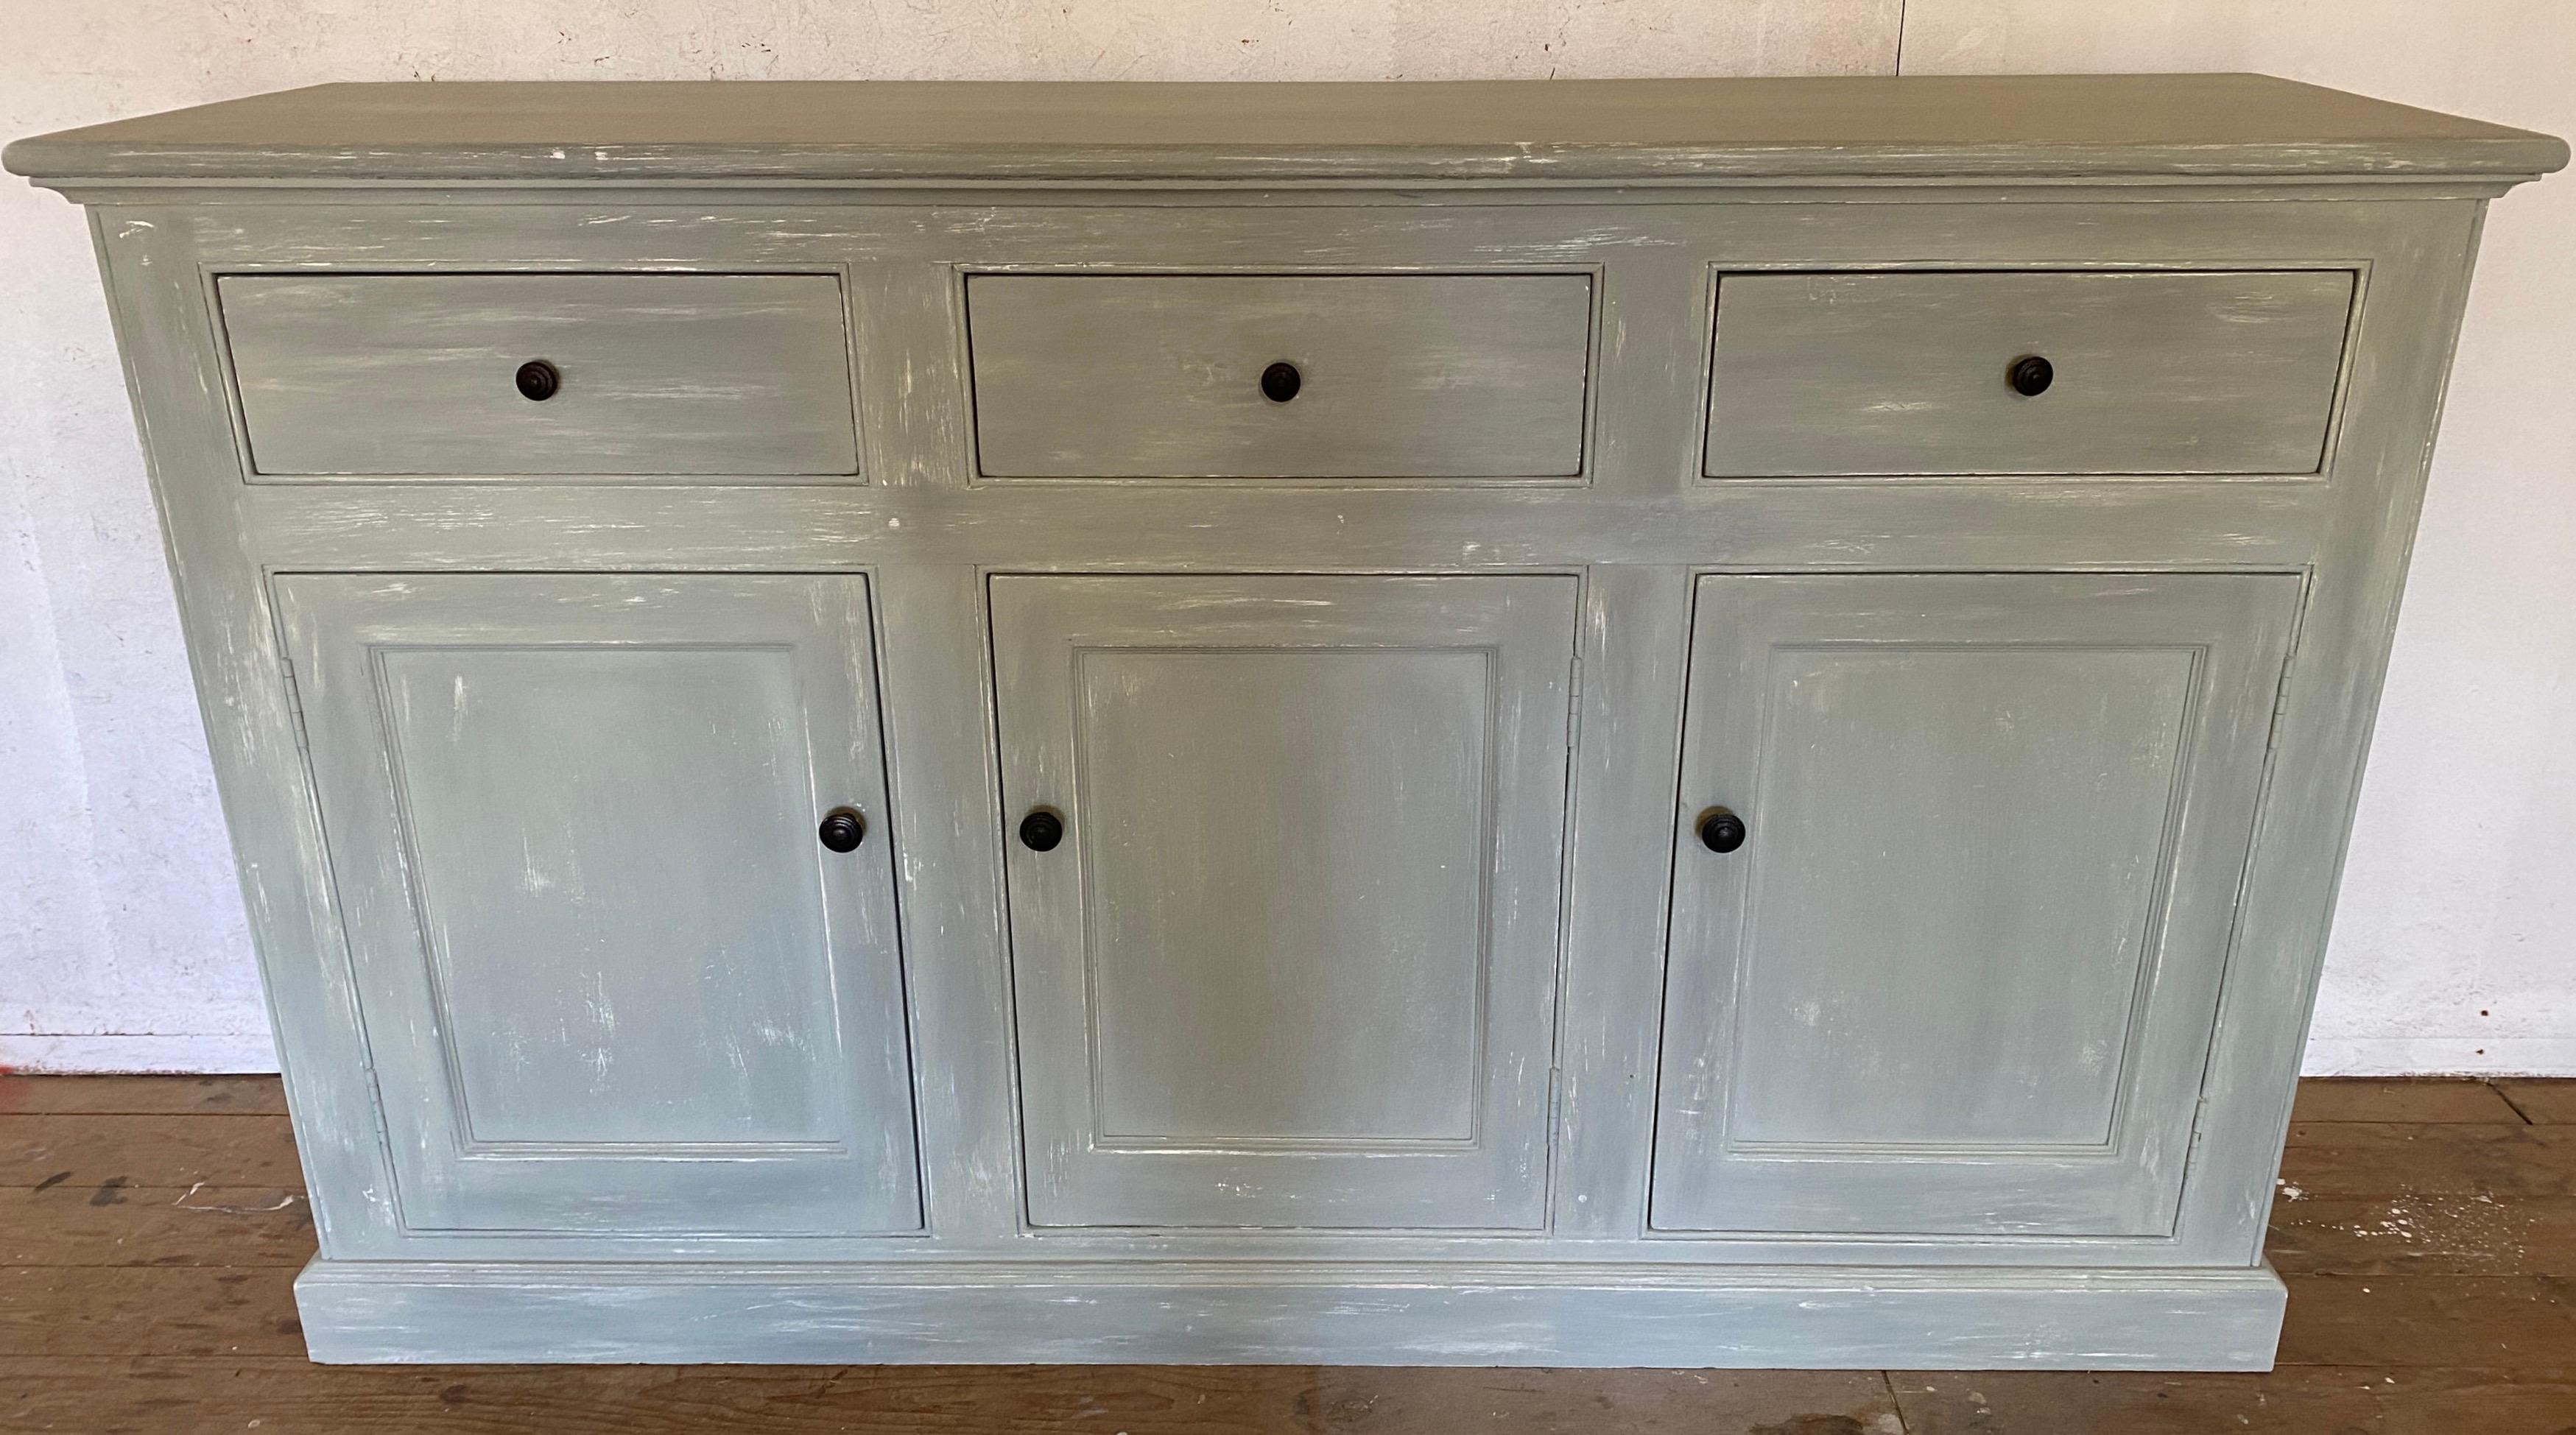 Add an American, Swedish Gustavian or French Provincial country look to your kitchen or dining room with this antique American commode or buffet server.
This handsome tall wide and deep commode kitchen chest, painted a light Swedish grey has been